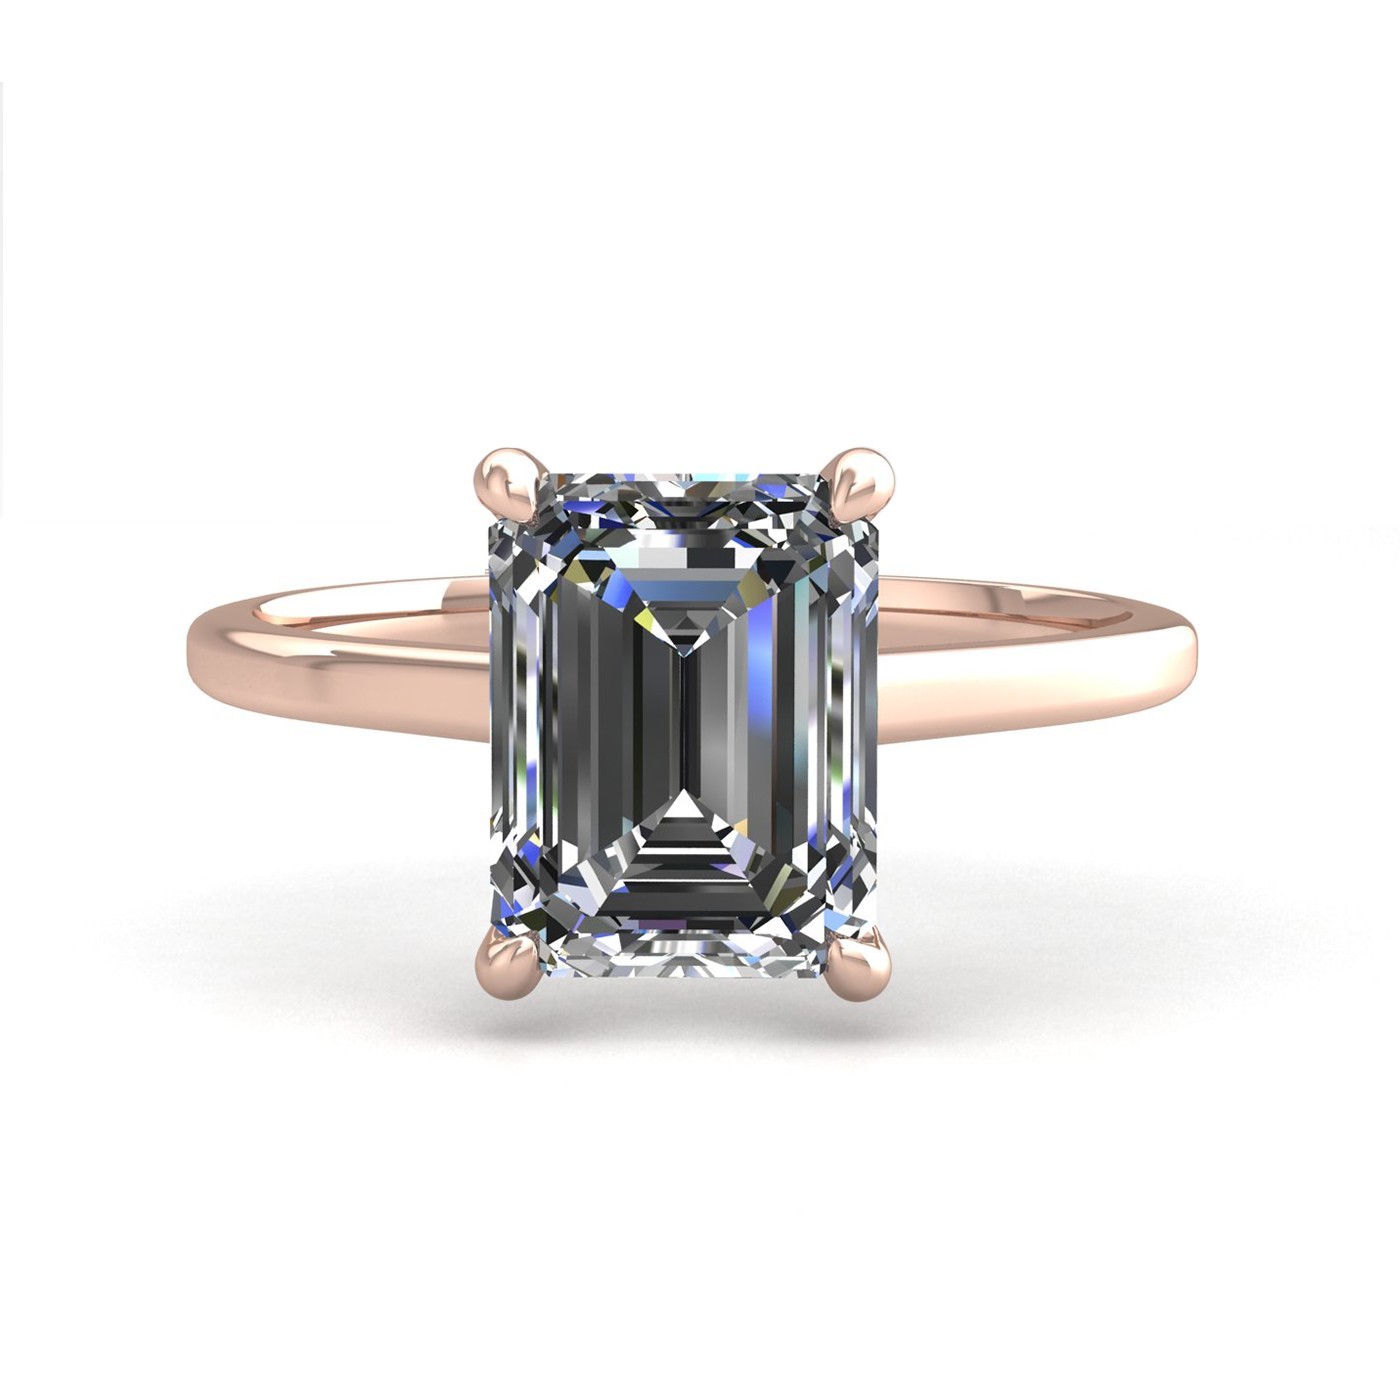 18k rose gold  0,50 ct 4 prongs solitaire emerald cut diamond engagement ring with whisper thin band Photos & images